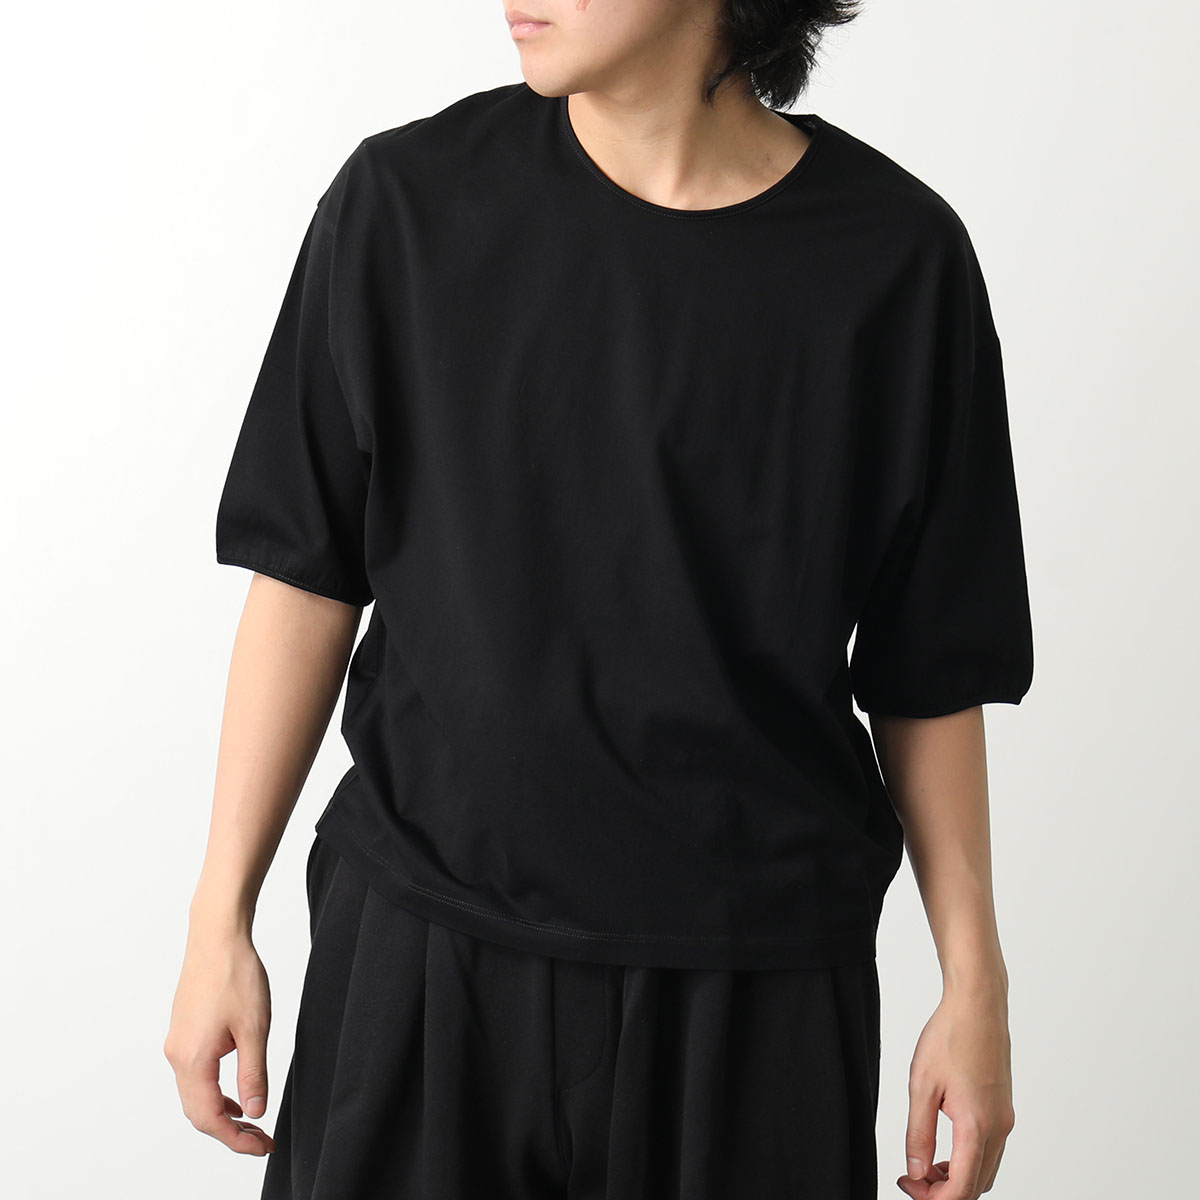 Lemaire ルメール Tシャツ SS RELAXED TEE TO1231 LJ1018 メンズ 半袖 カットソー クルーネック コットン  カラー2色